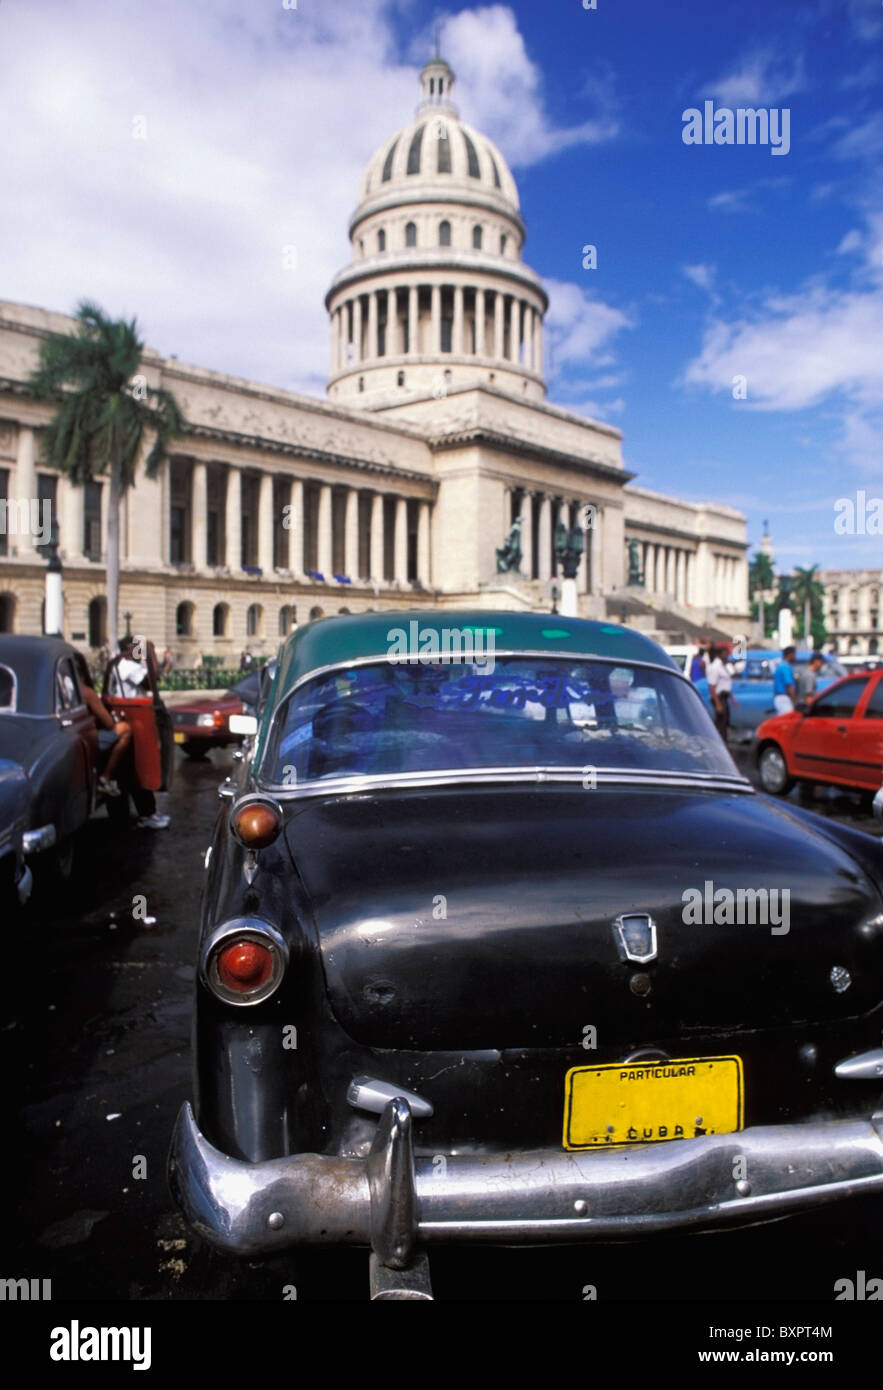 El Capitolio With Old American Cars Stock Photo